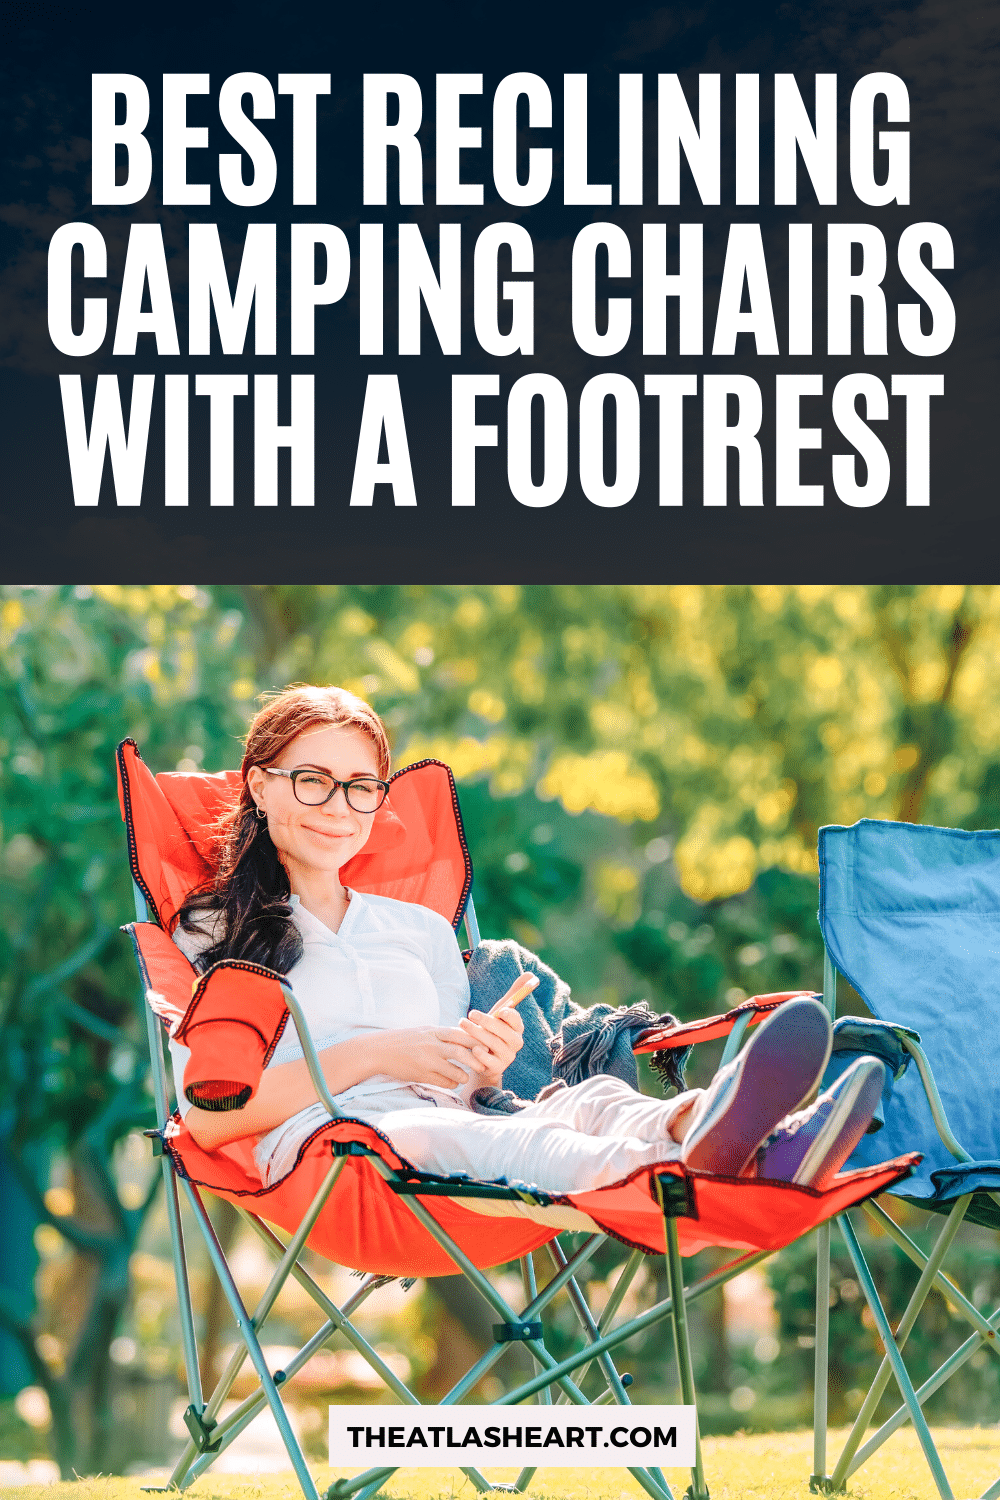 10 Best Reclining Camping Chairs with a Footrest for Luxe Comfort in 2022